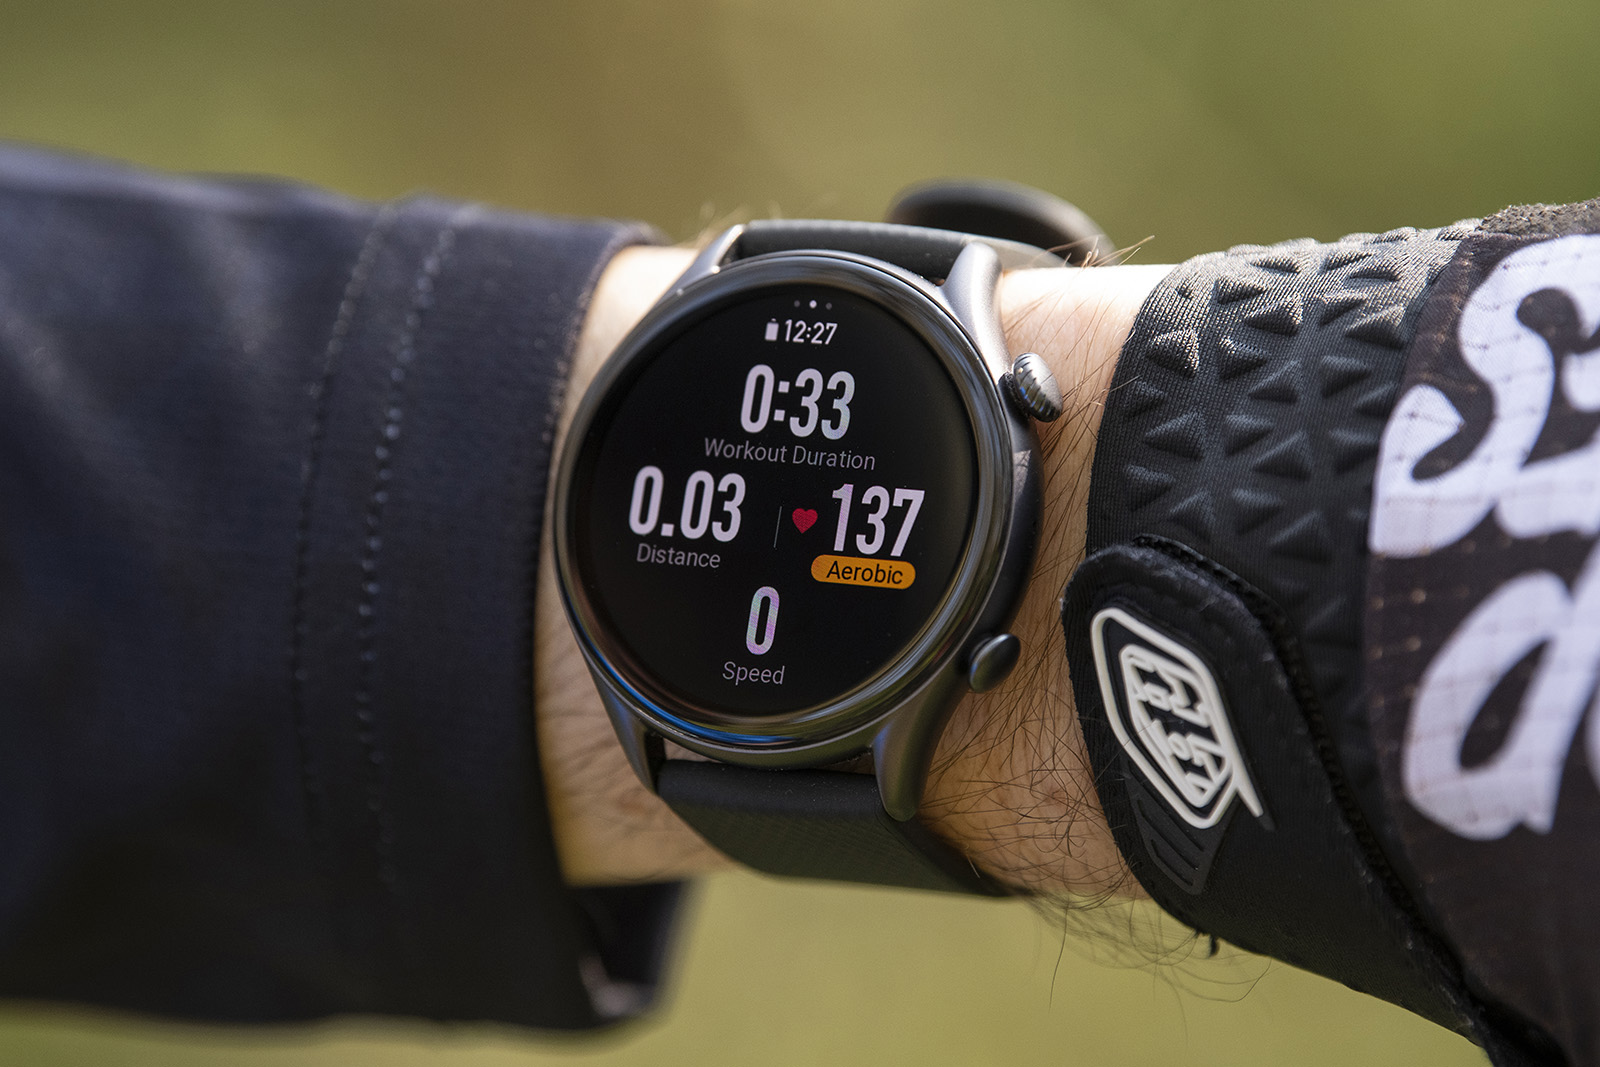 Amazfit GTS 3, Amazfit GTR 3 and Amazfit GTR 3 Pro smartwatches receive a  major system update